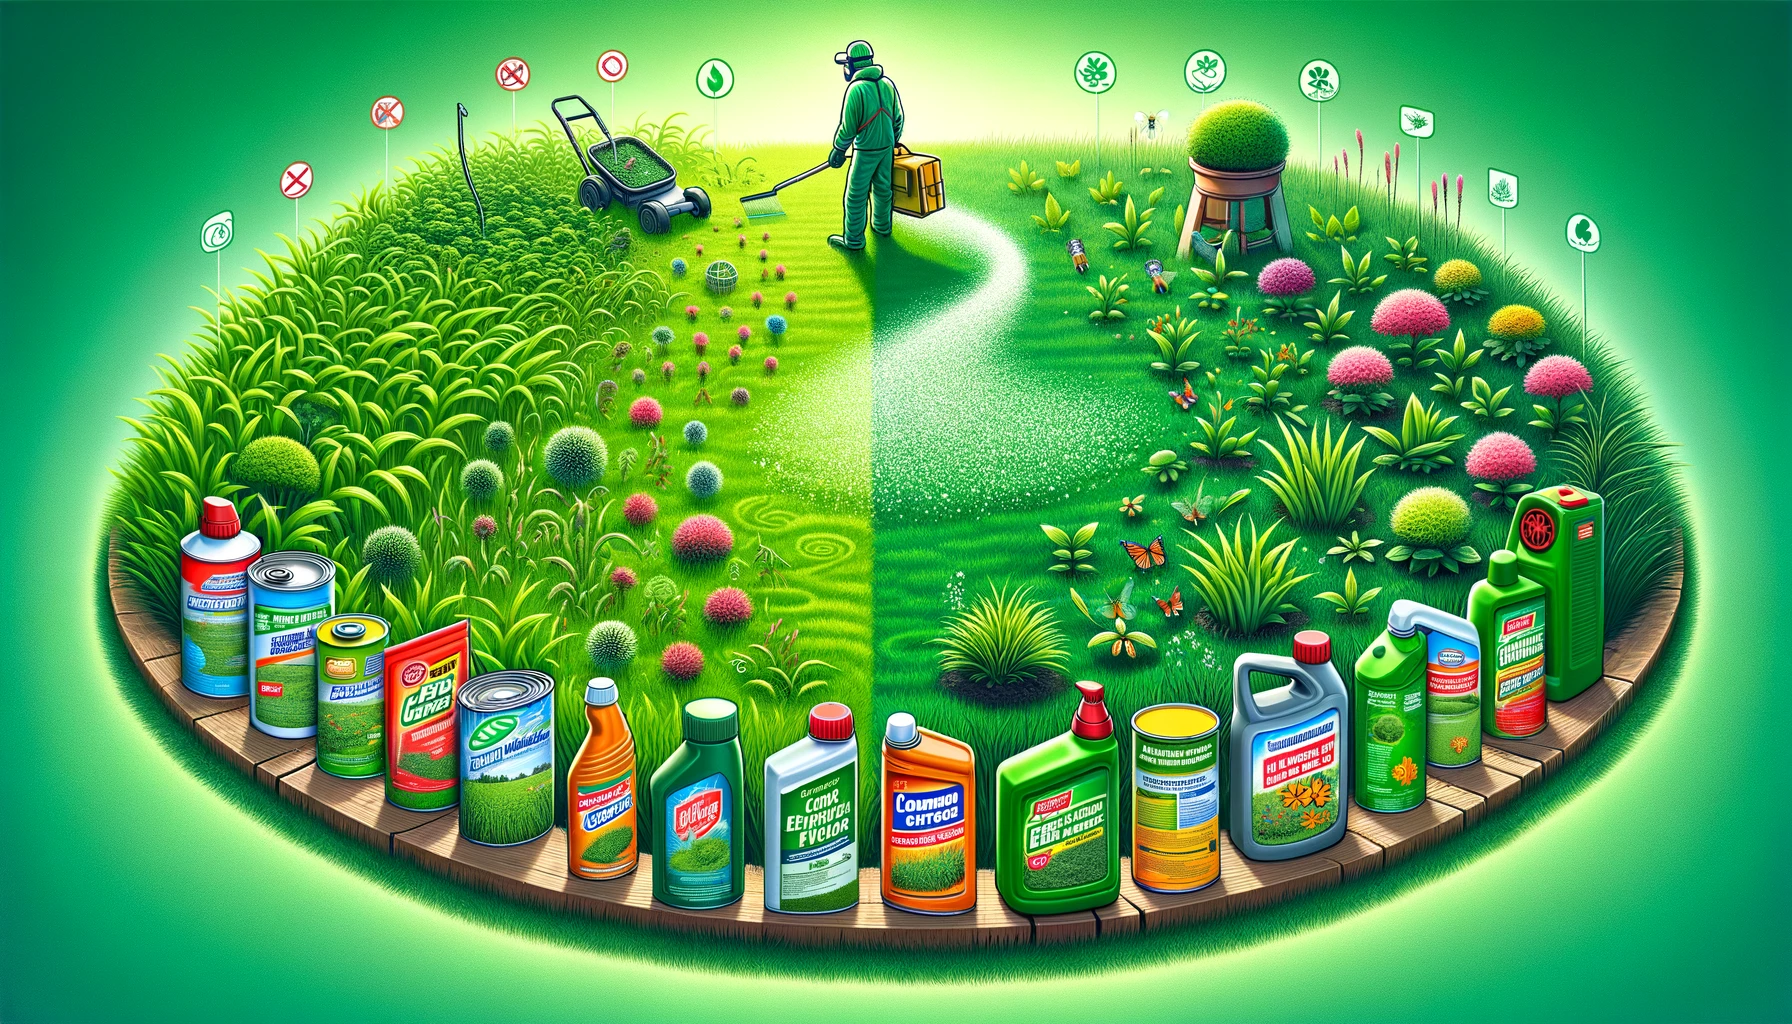 Zoysia Grass Weed Control Products